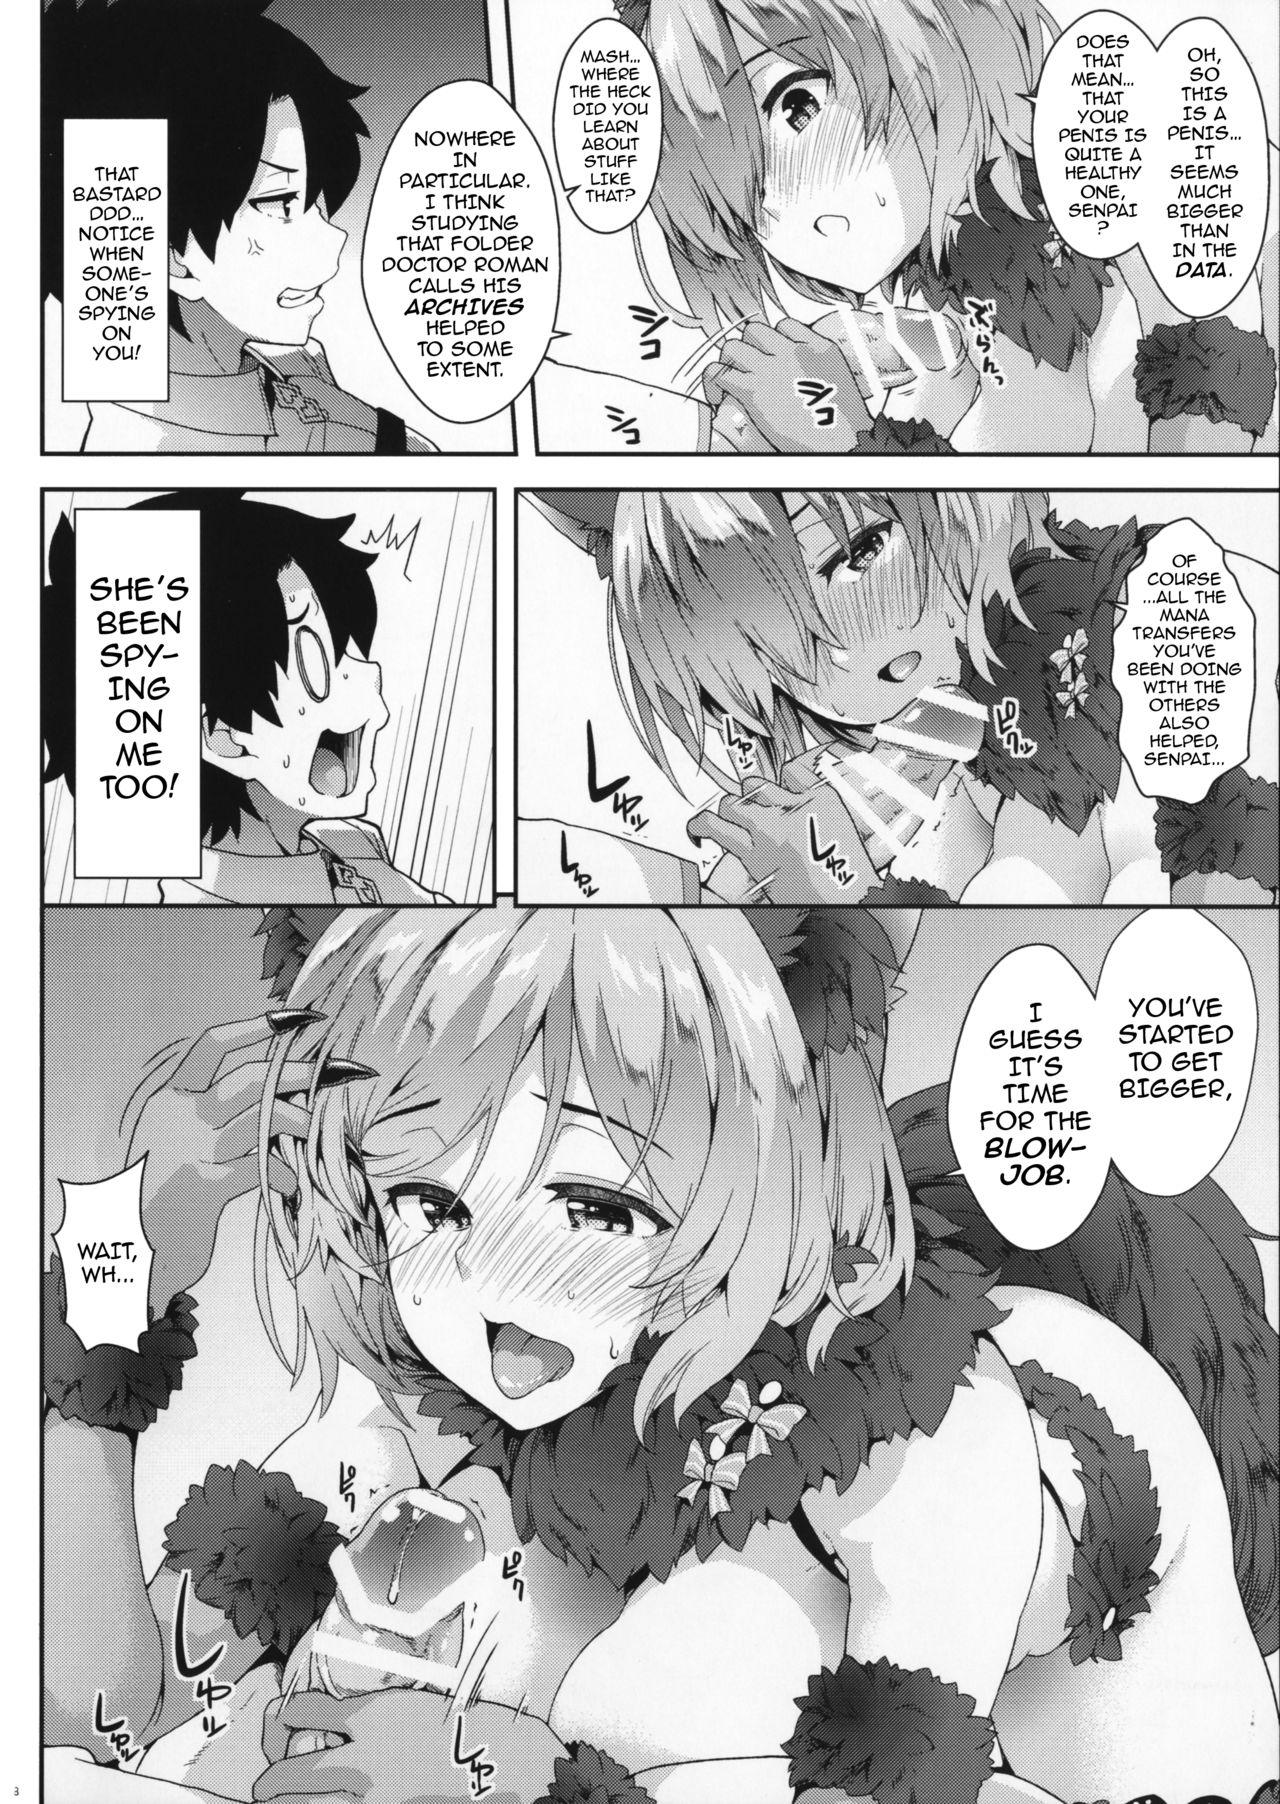 Lezdom Why am I jealous of you? - Fate grand order Blond - Page 7